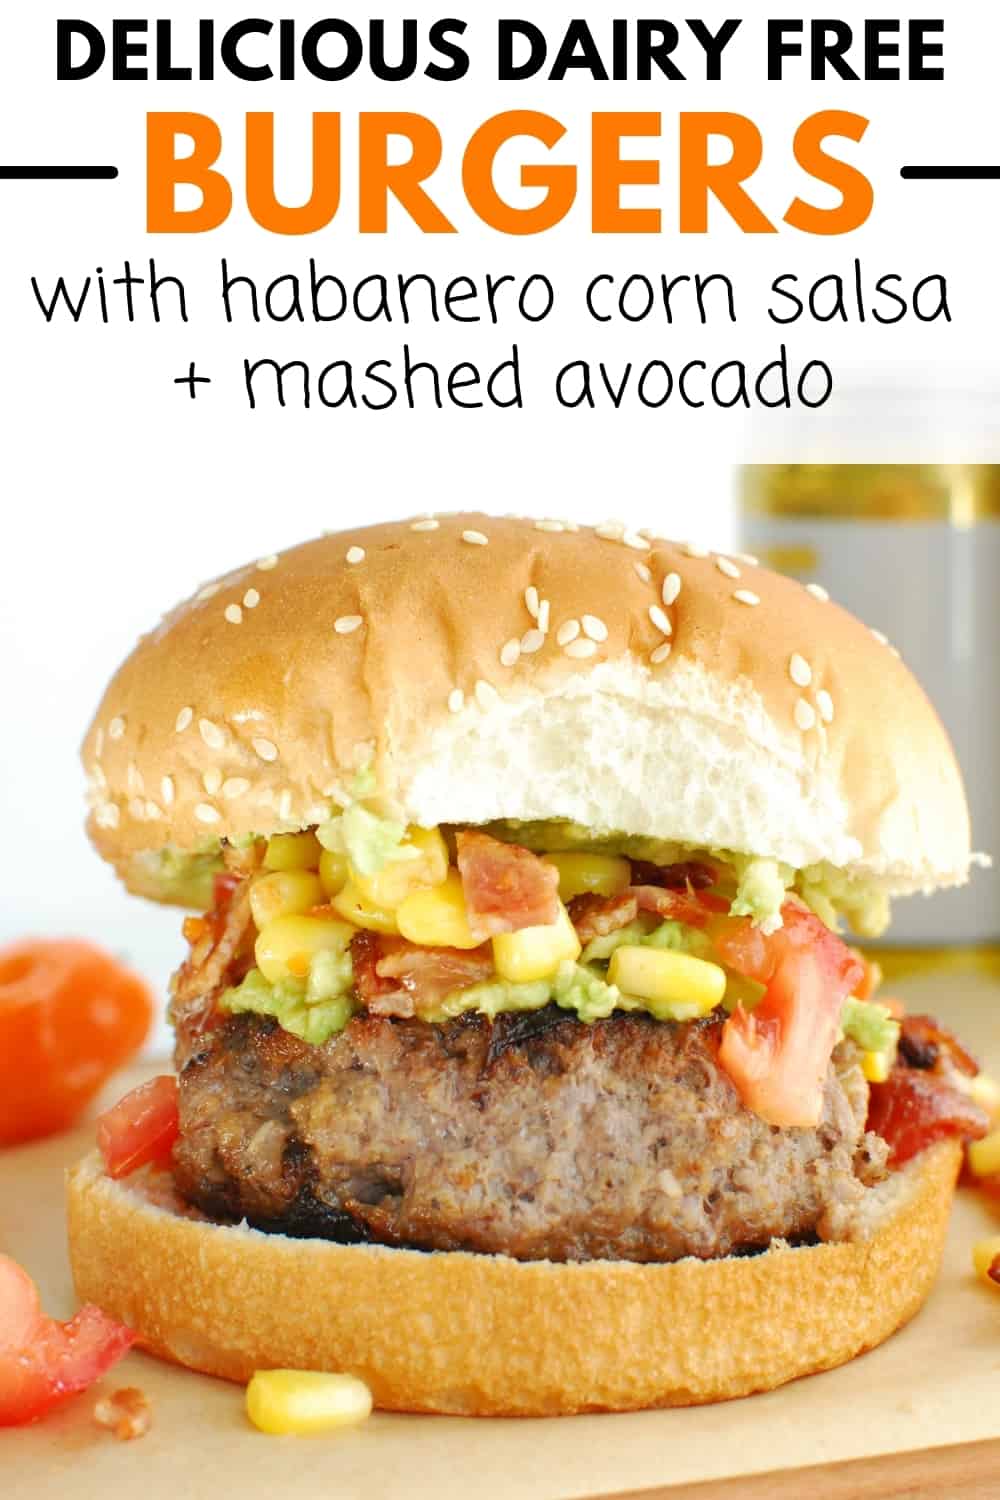 A burger with habanero salsa and mashed avocado on a wooden serving dish.